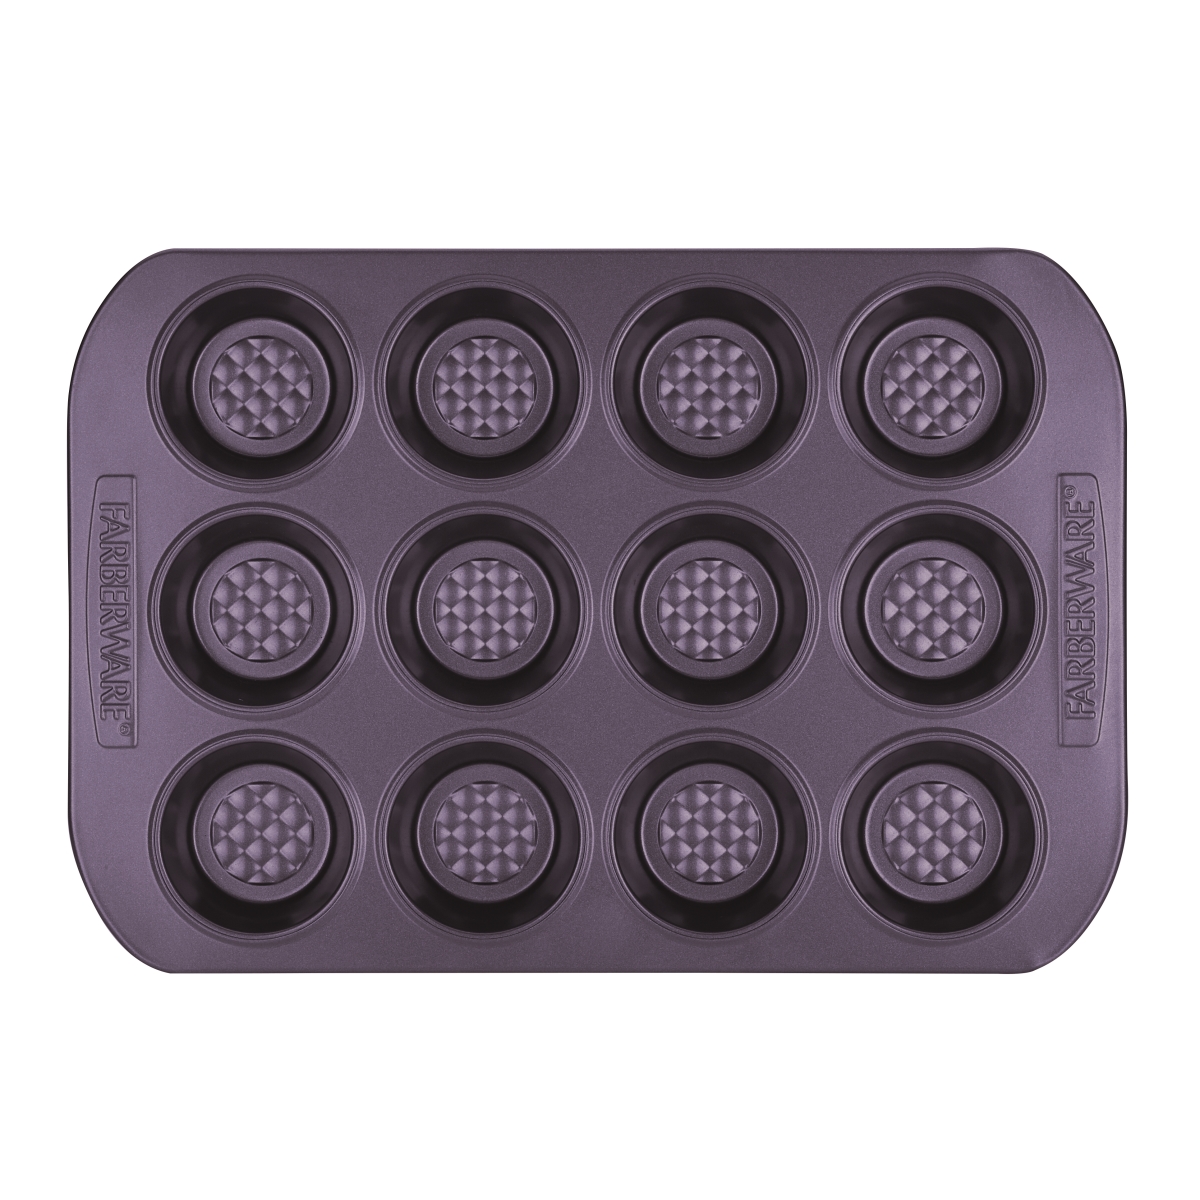 47141 Colorvive Nonstick 12 Cup Muffin Pan, Purple